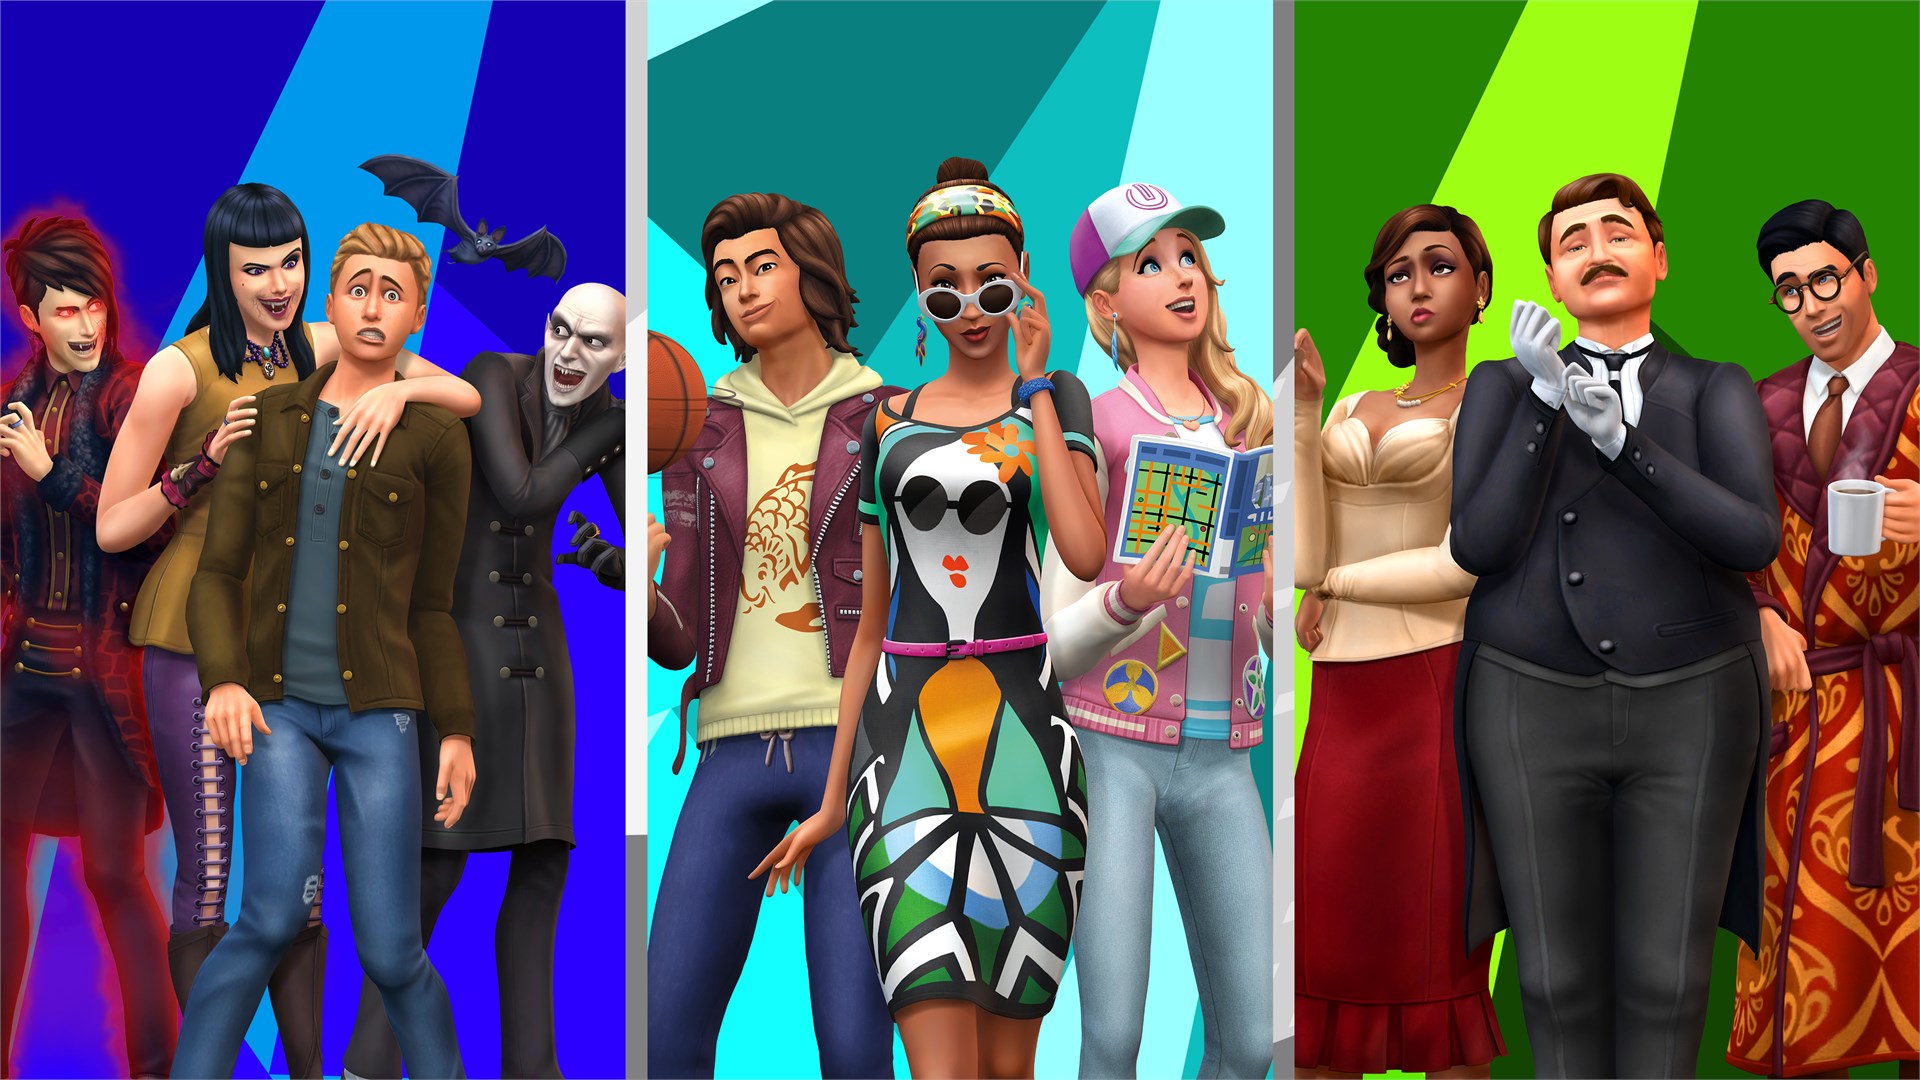 The sims 4 steam price фото 44